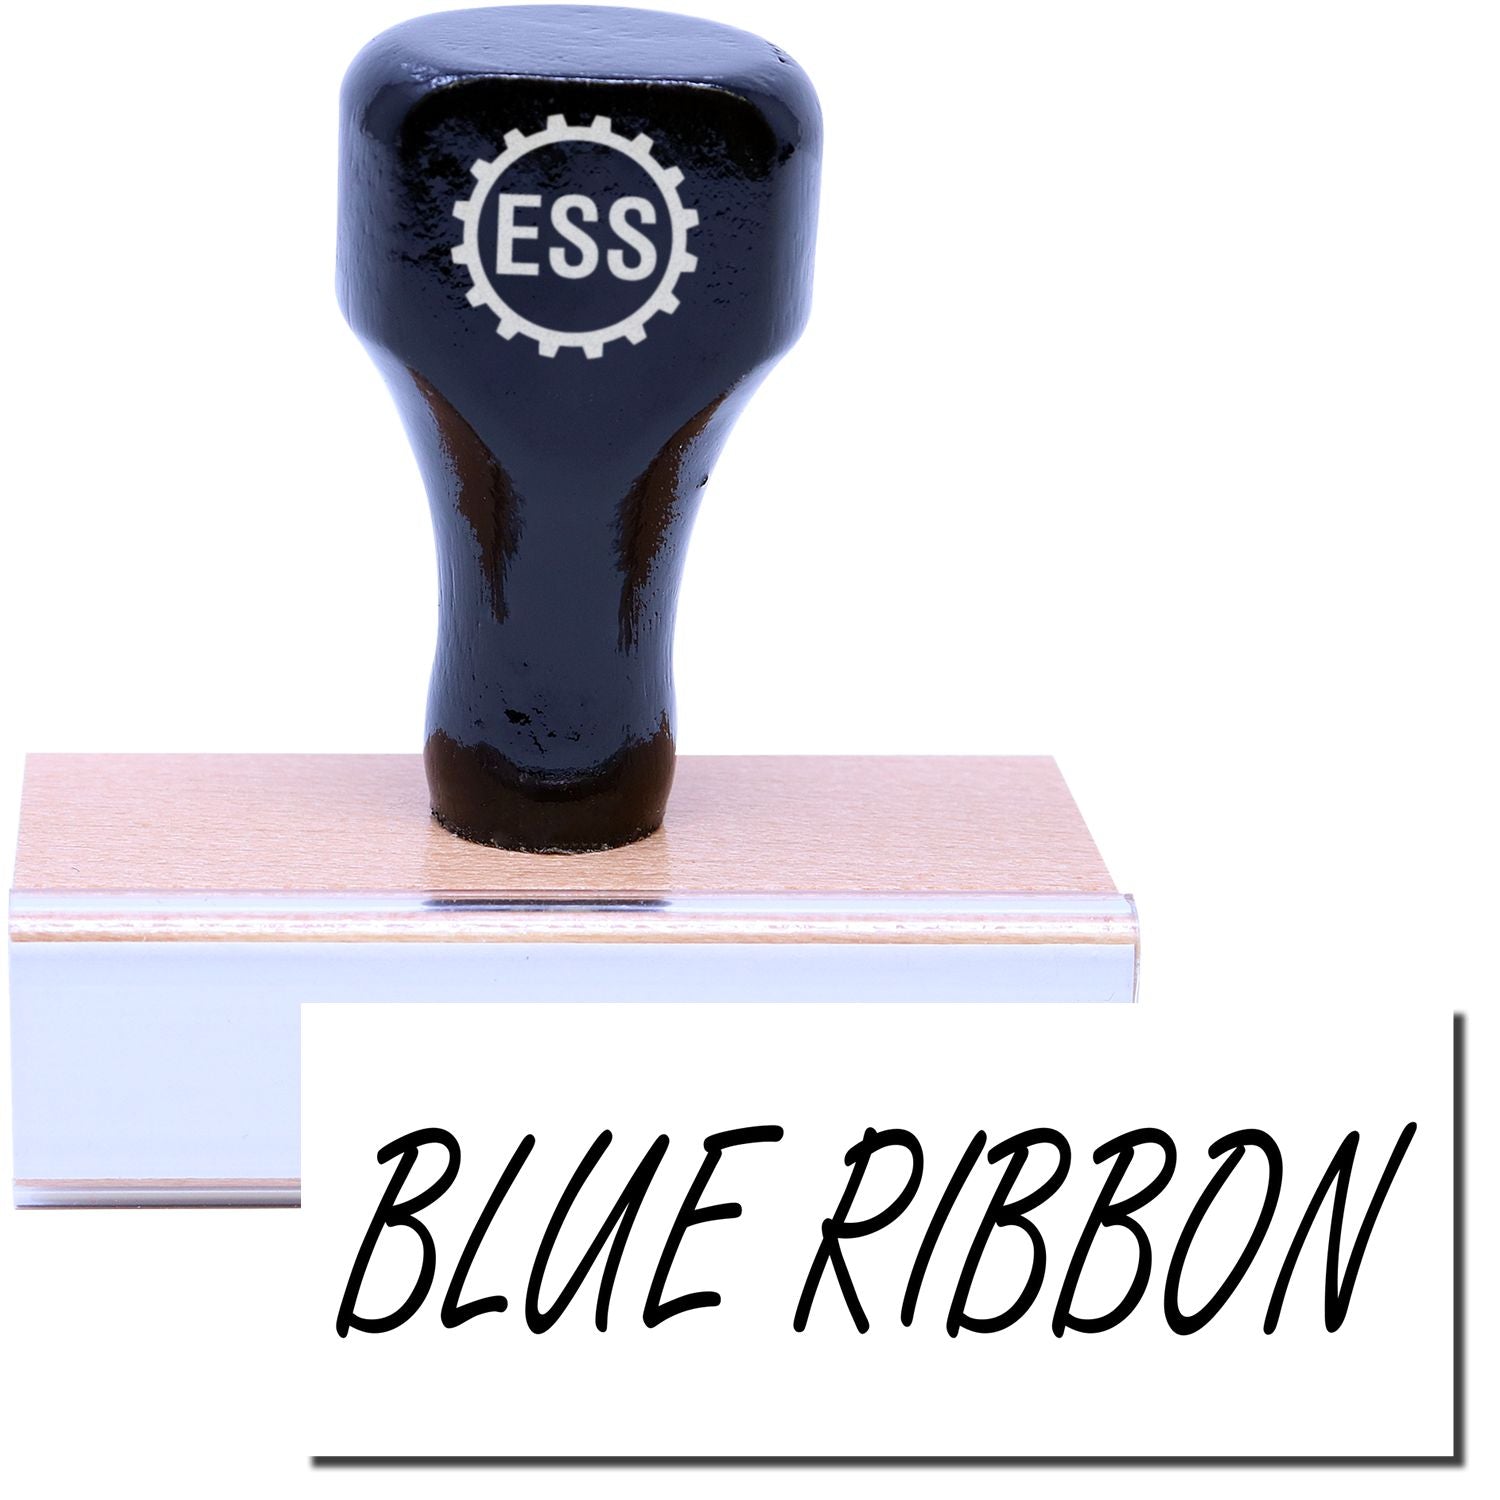 A stock office rubber stamp with a stamped image showing how the text "BLUE RIBBON" is displayed after stamping.